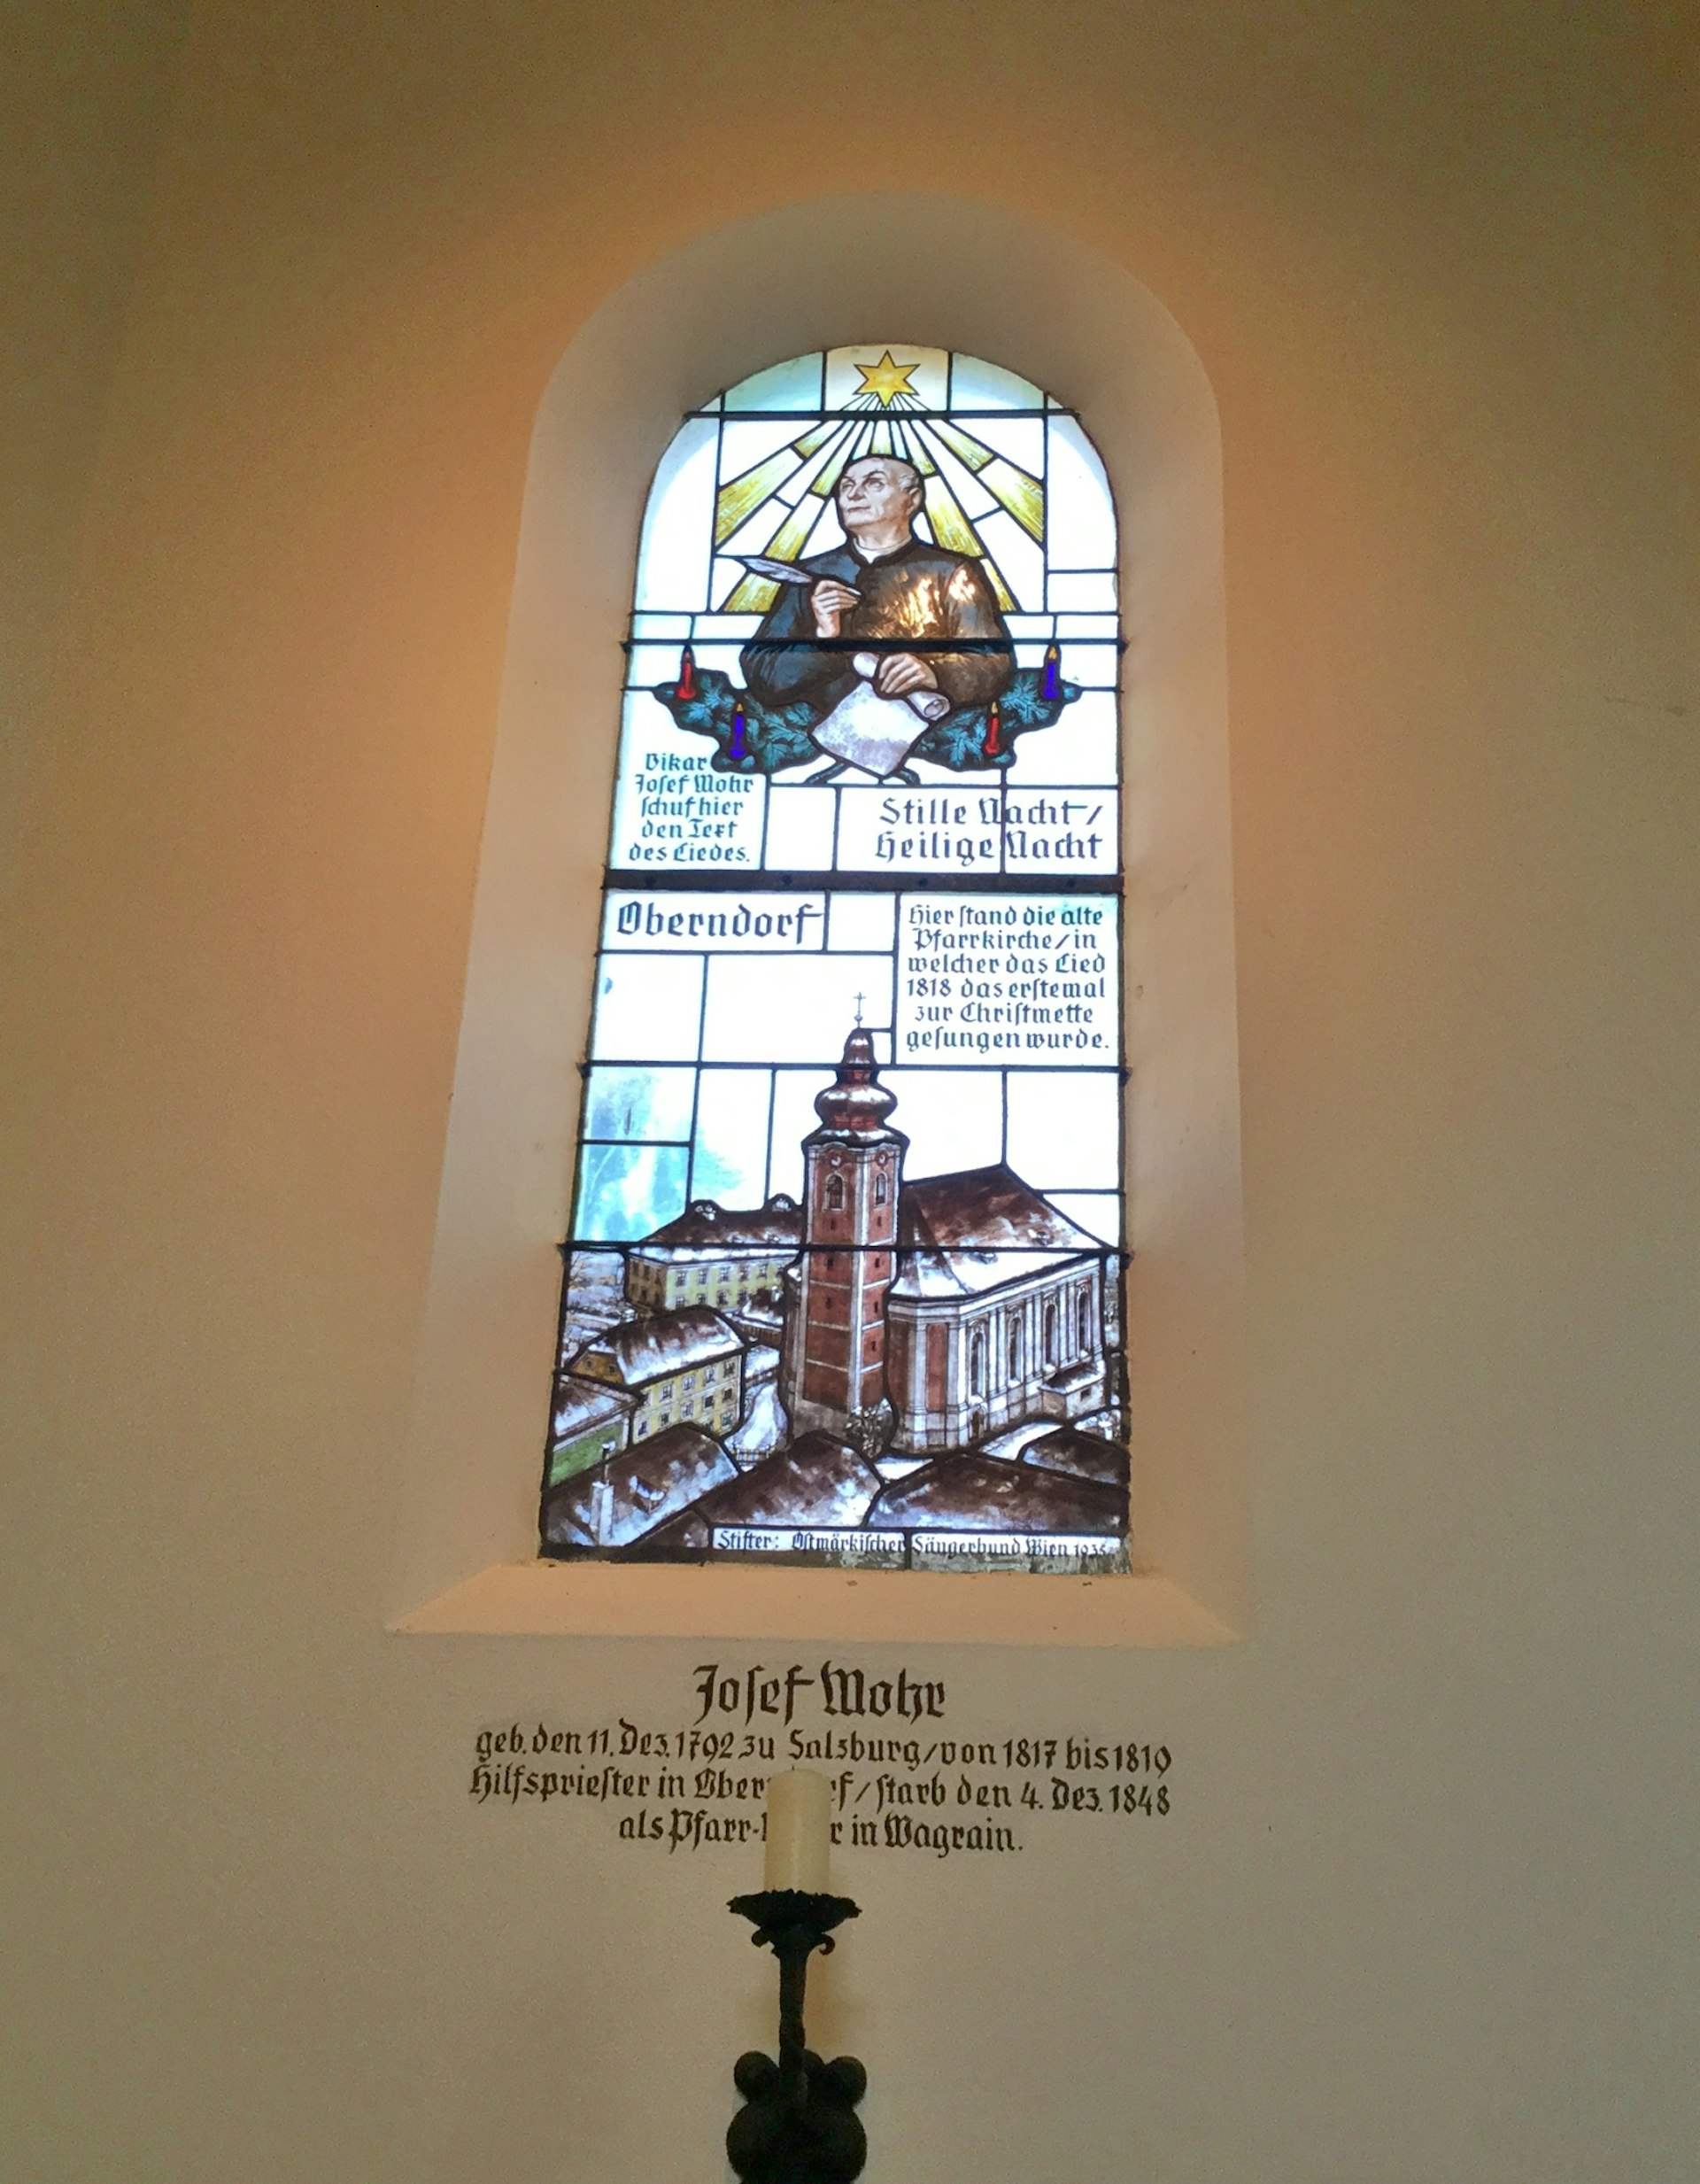 A stained-glass window in the Silent Night Chapel, Oberdorf depicting Joseph Mohr